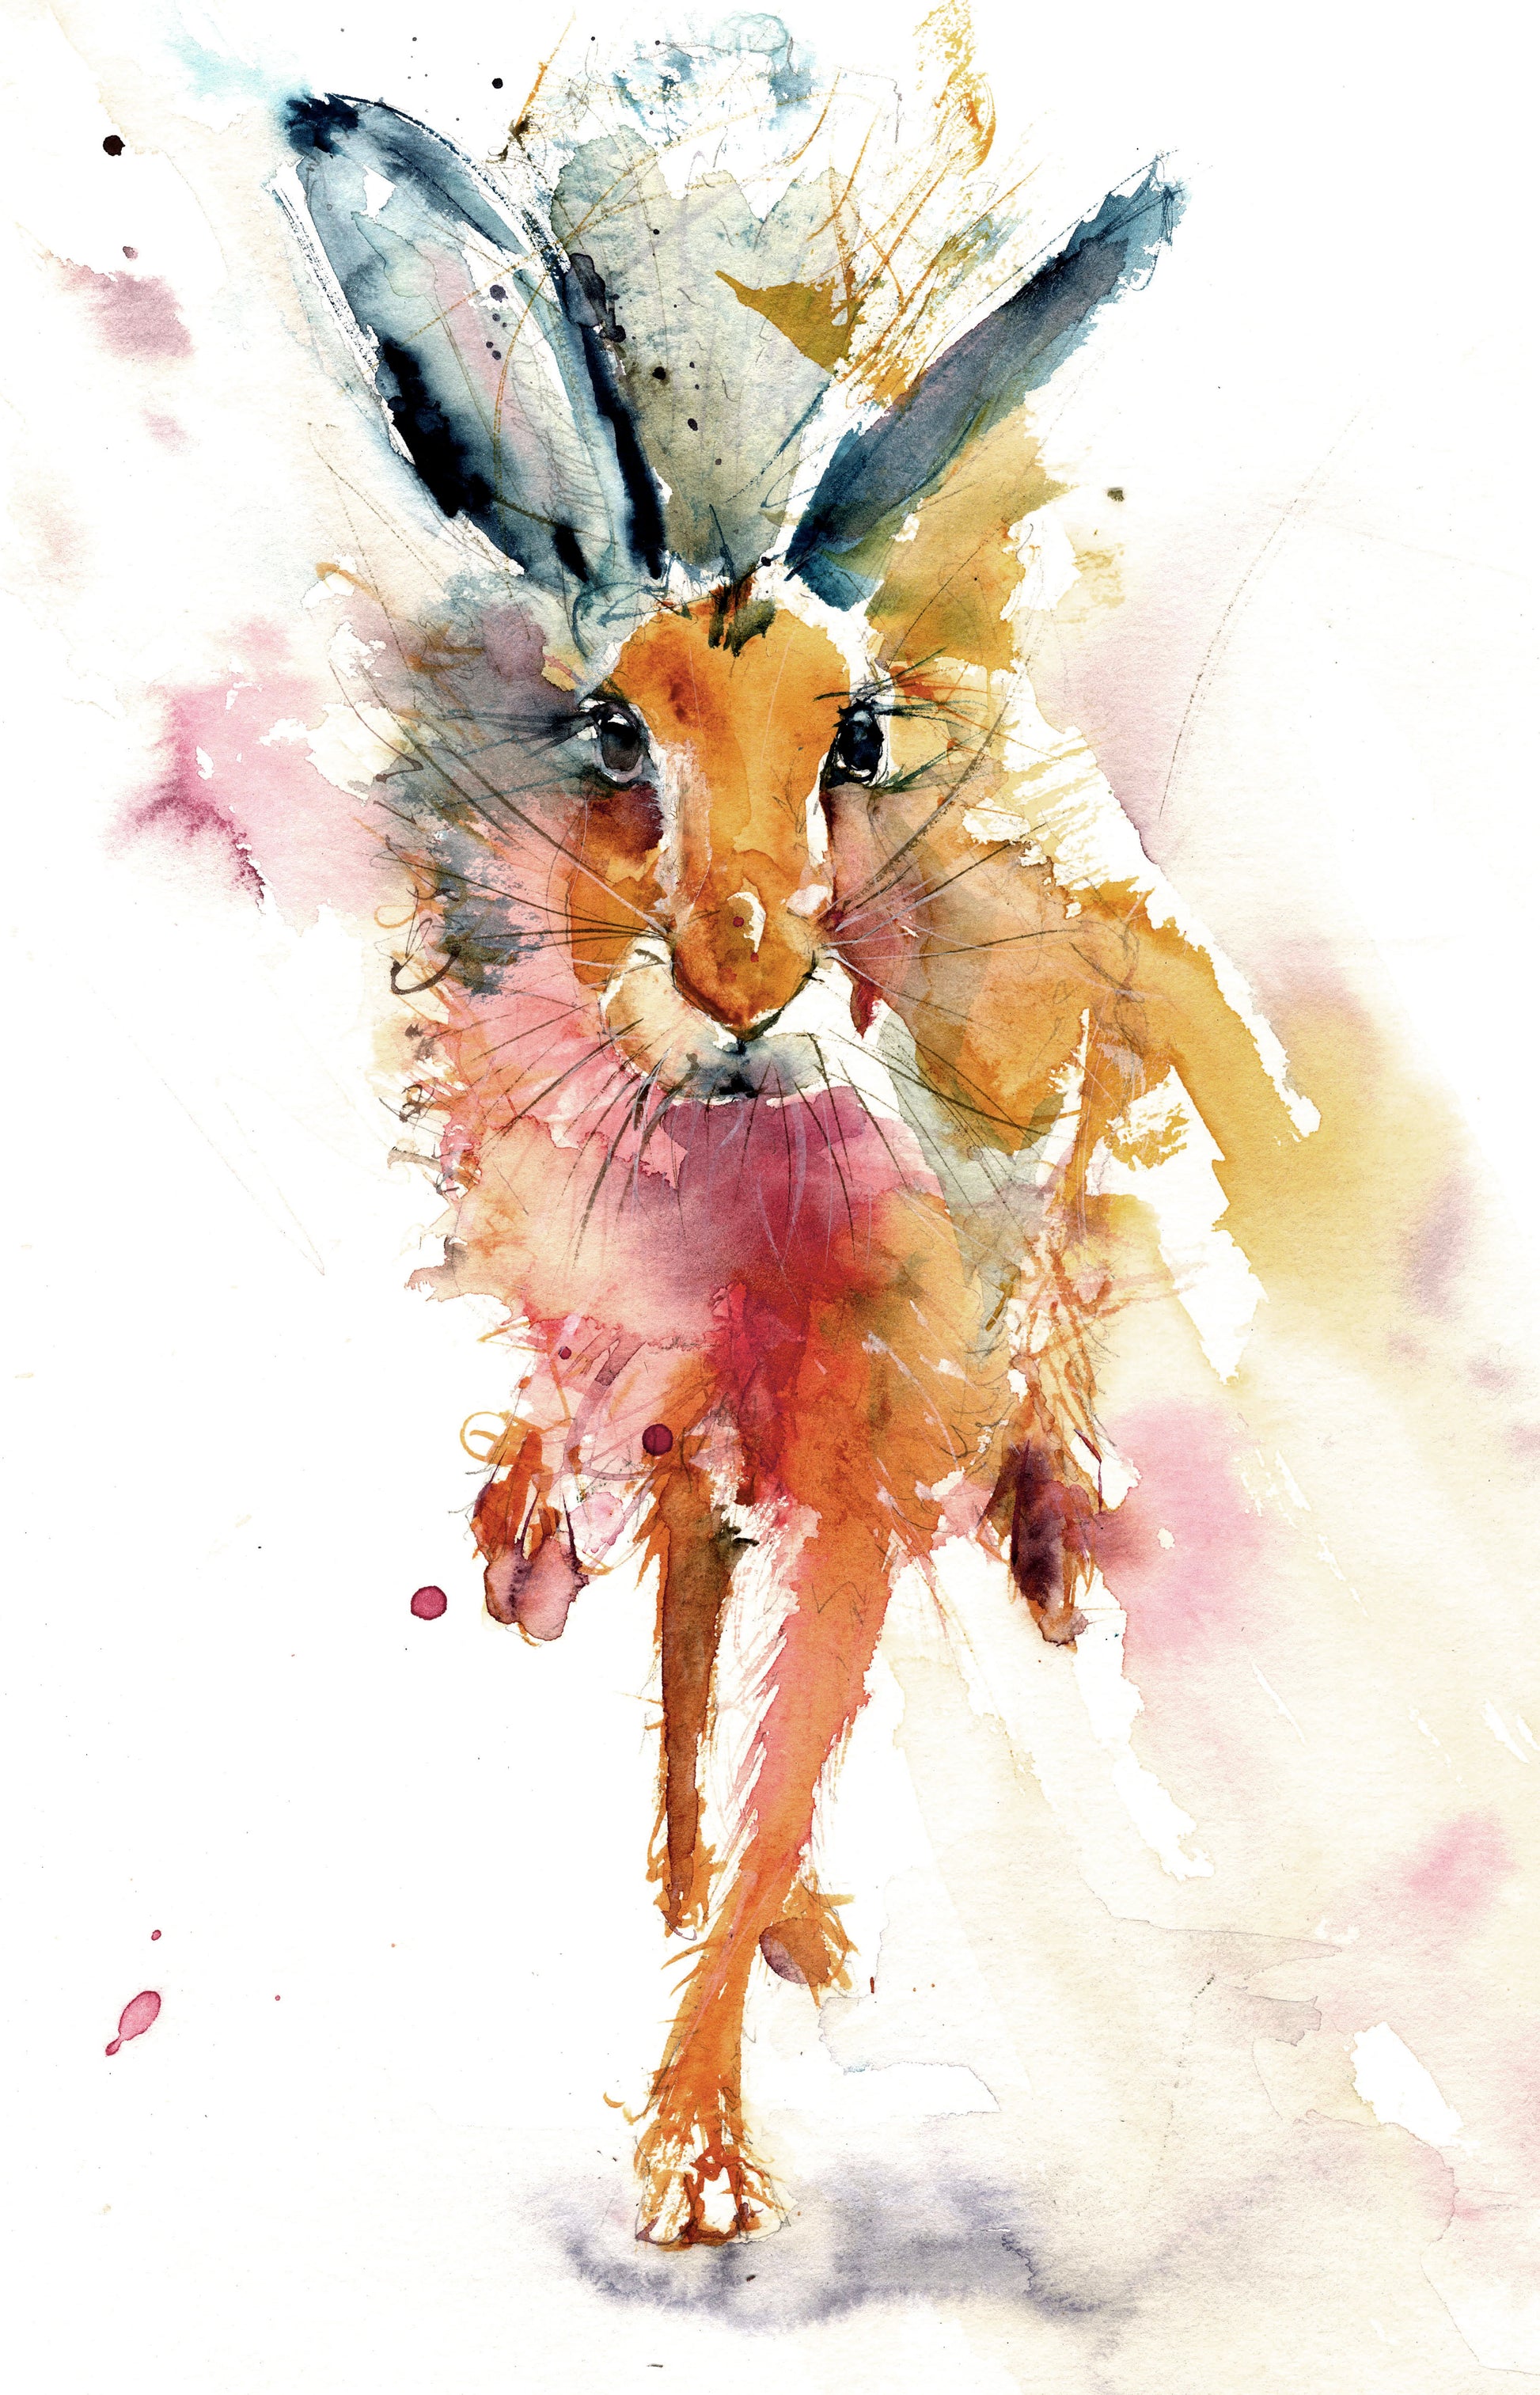 Louis hare limited edition print - Jen Buckley Art limited edition animal art prints